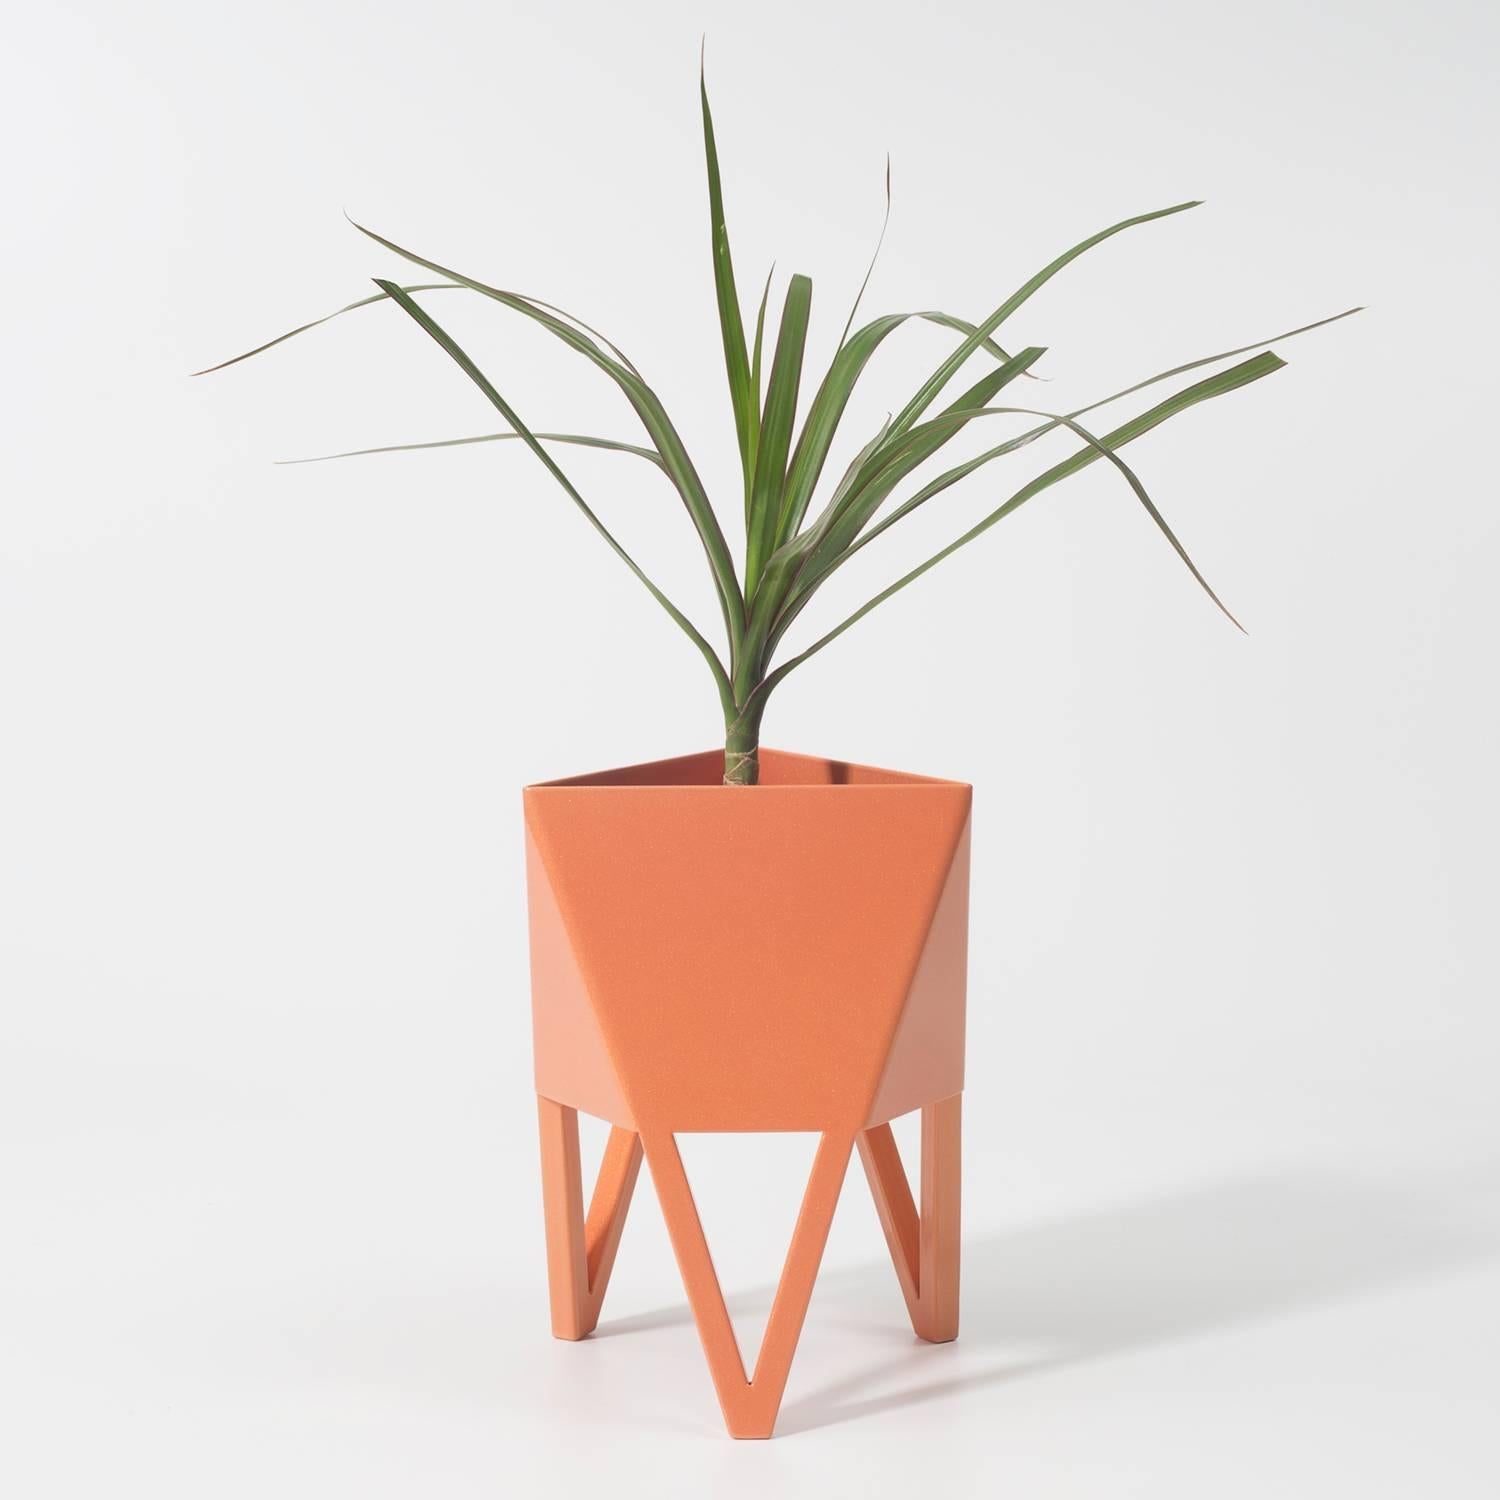 Deca Planter in Flat Black Steel, Small, by Force/Collide 6